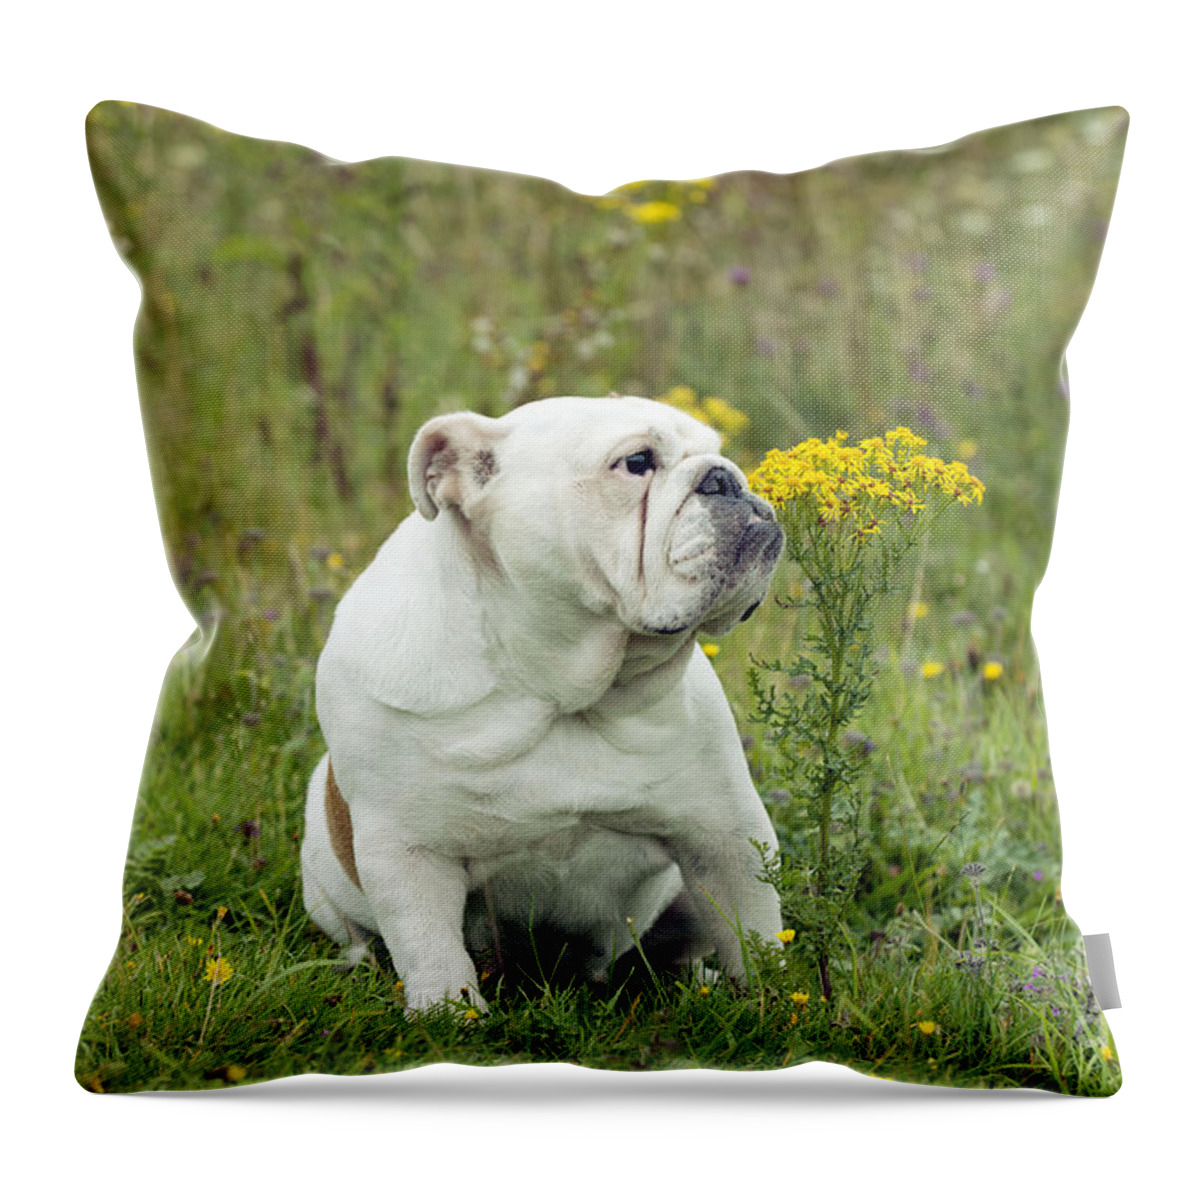 Dog Throw Pillow featuring the photograph Bulldog With Flowers by John Daniels